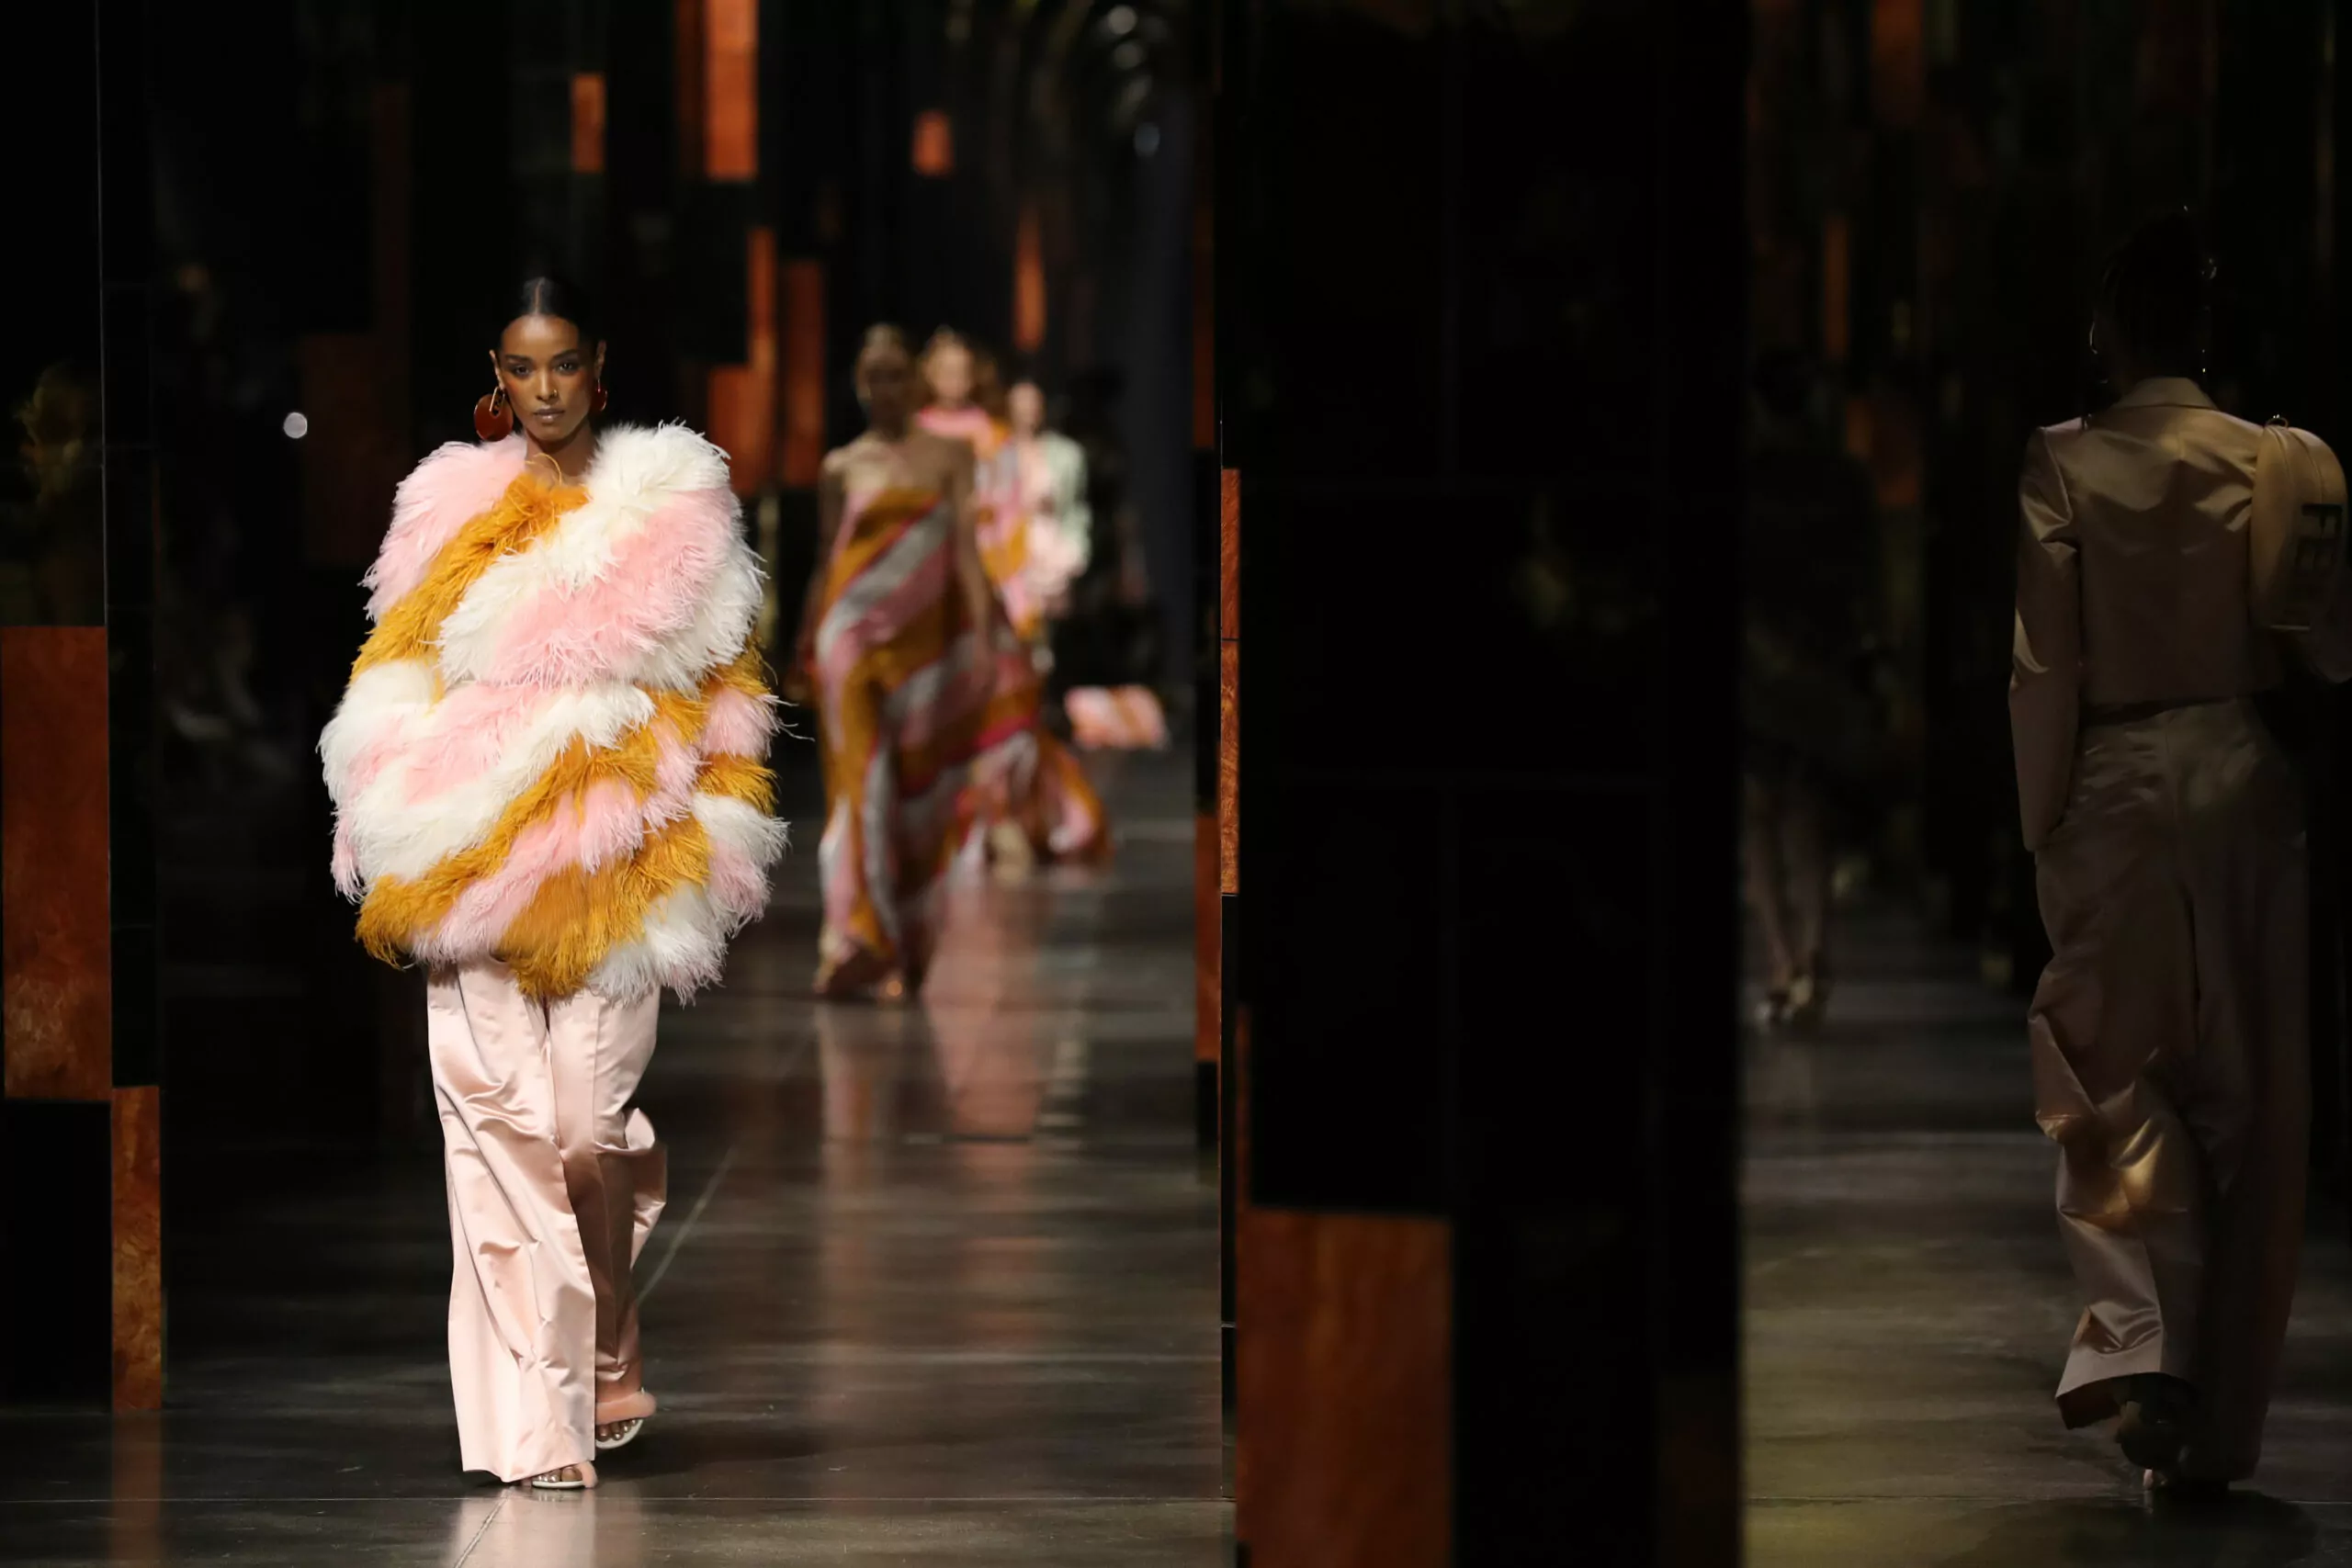 MILAN, ITALY - SEPTEMBER 22: Models walk the runway at the Fendi fashion show during the Milan Fashion Week - Spring / Summer 2022 on September 22, 2021 in Milan, Italy. (Photo by Vittorio Zunino Celotto/Getty Images)